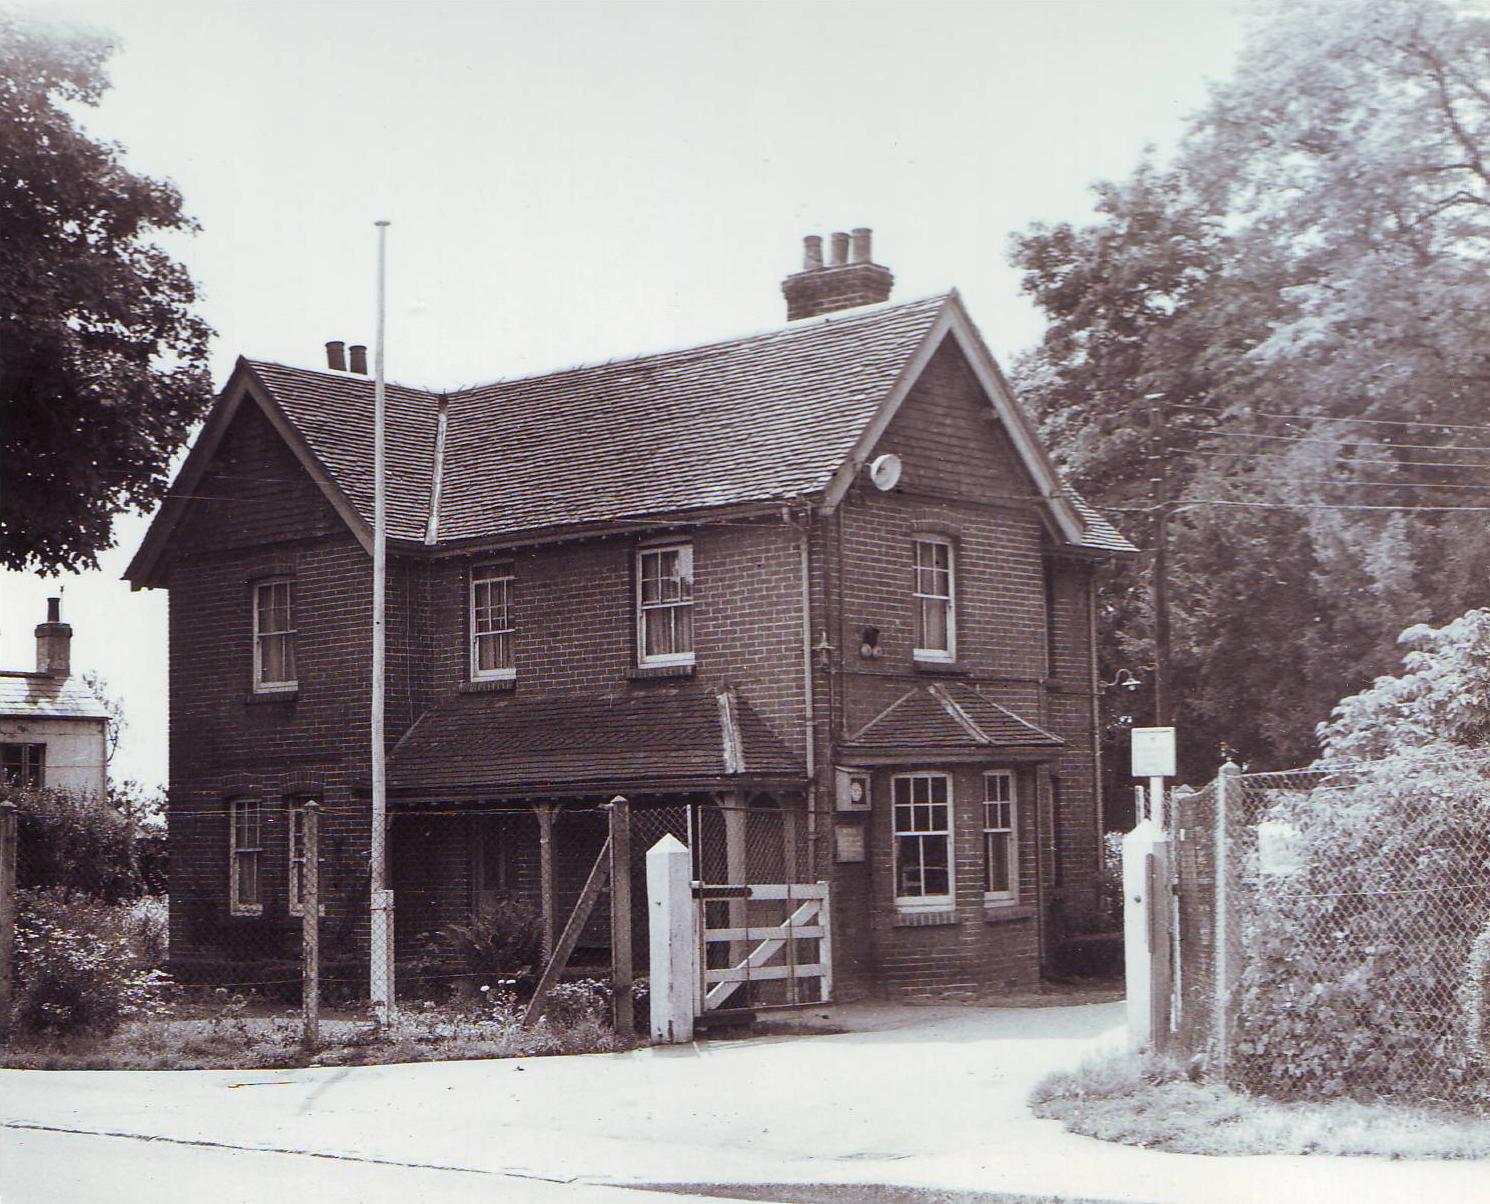 The Lodge at the entrance to the Crabwood House estate